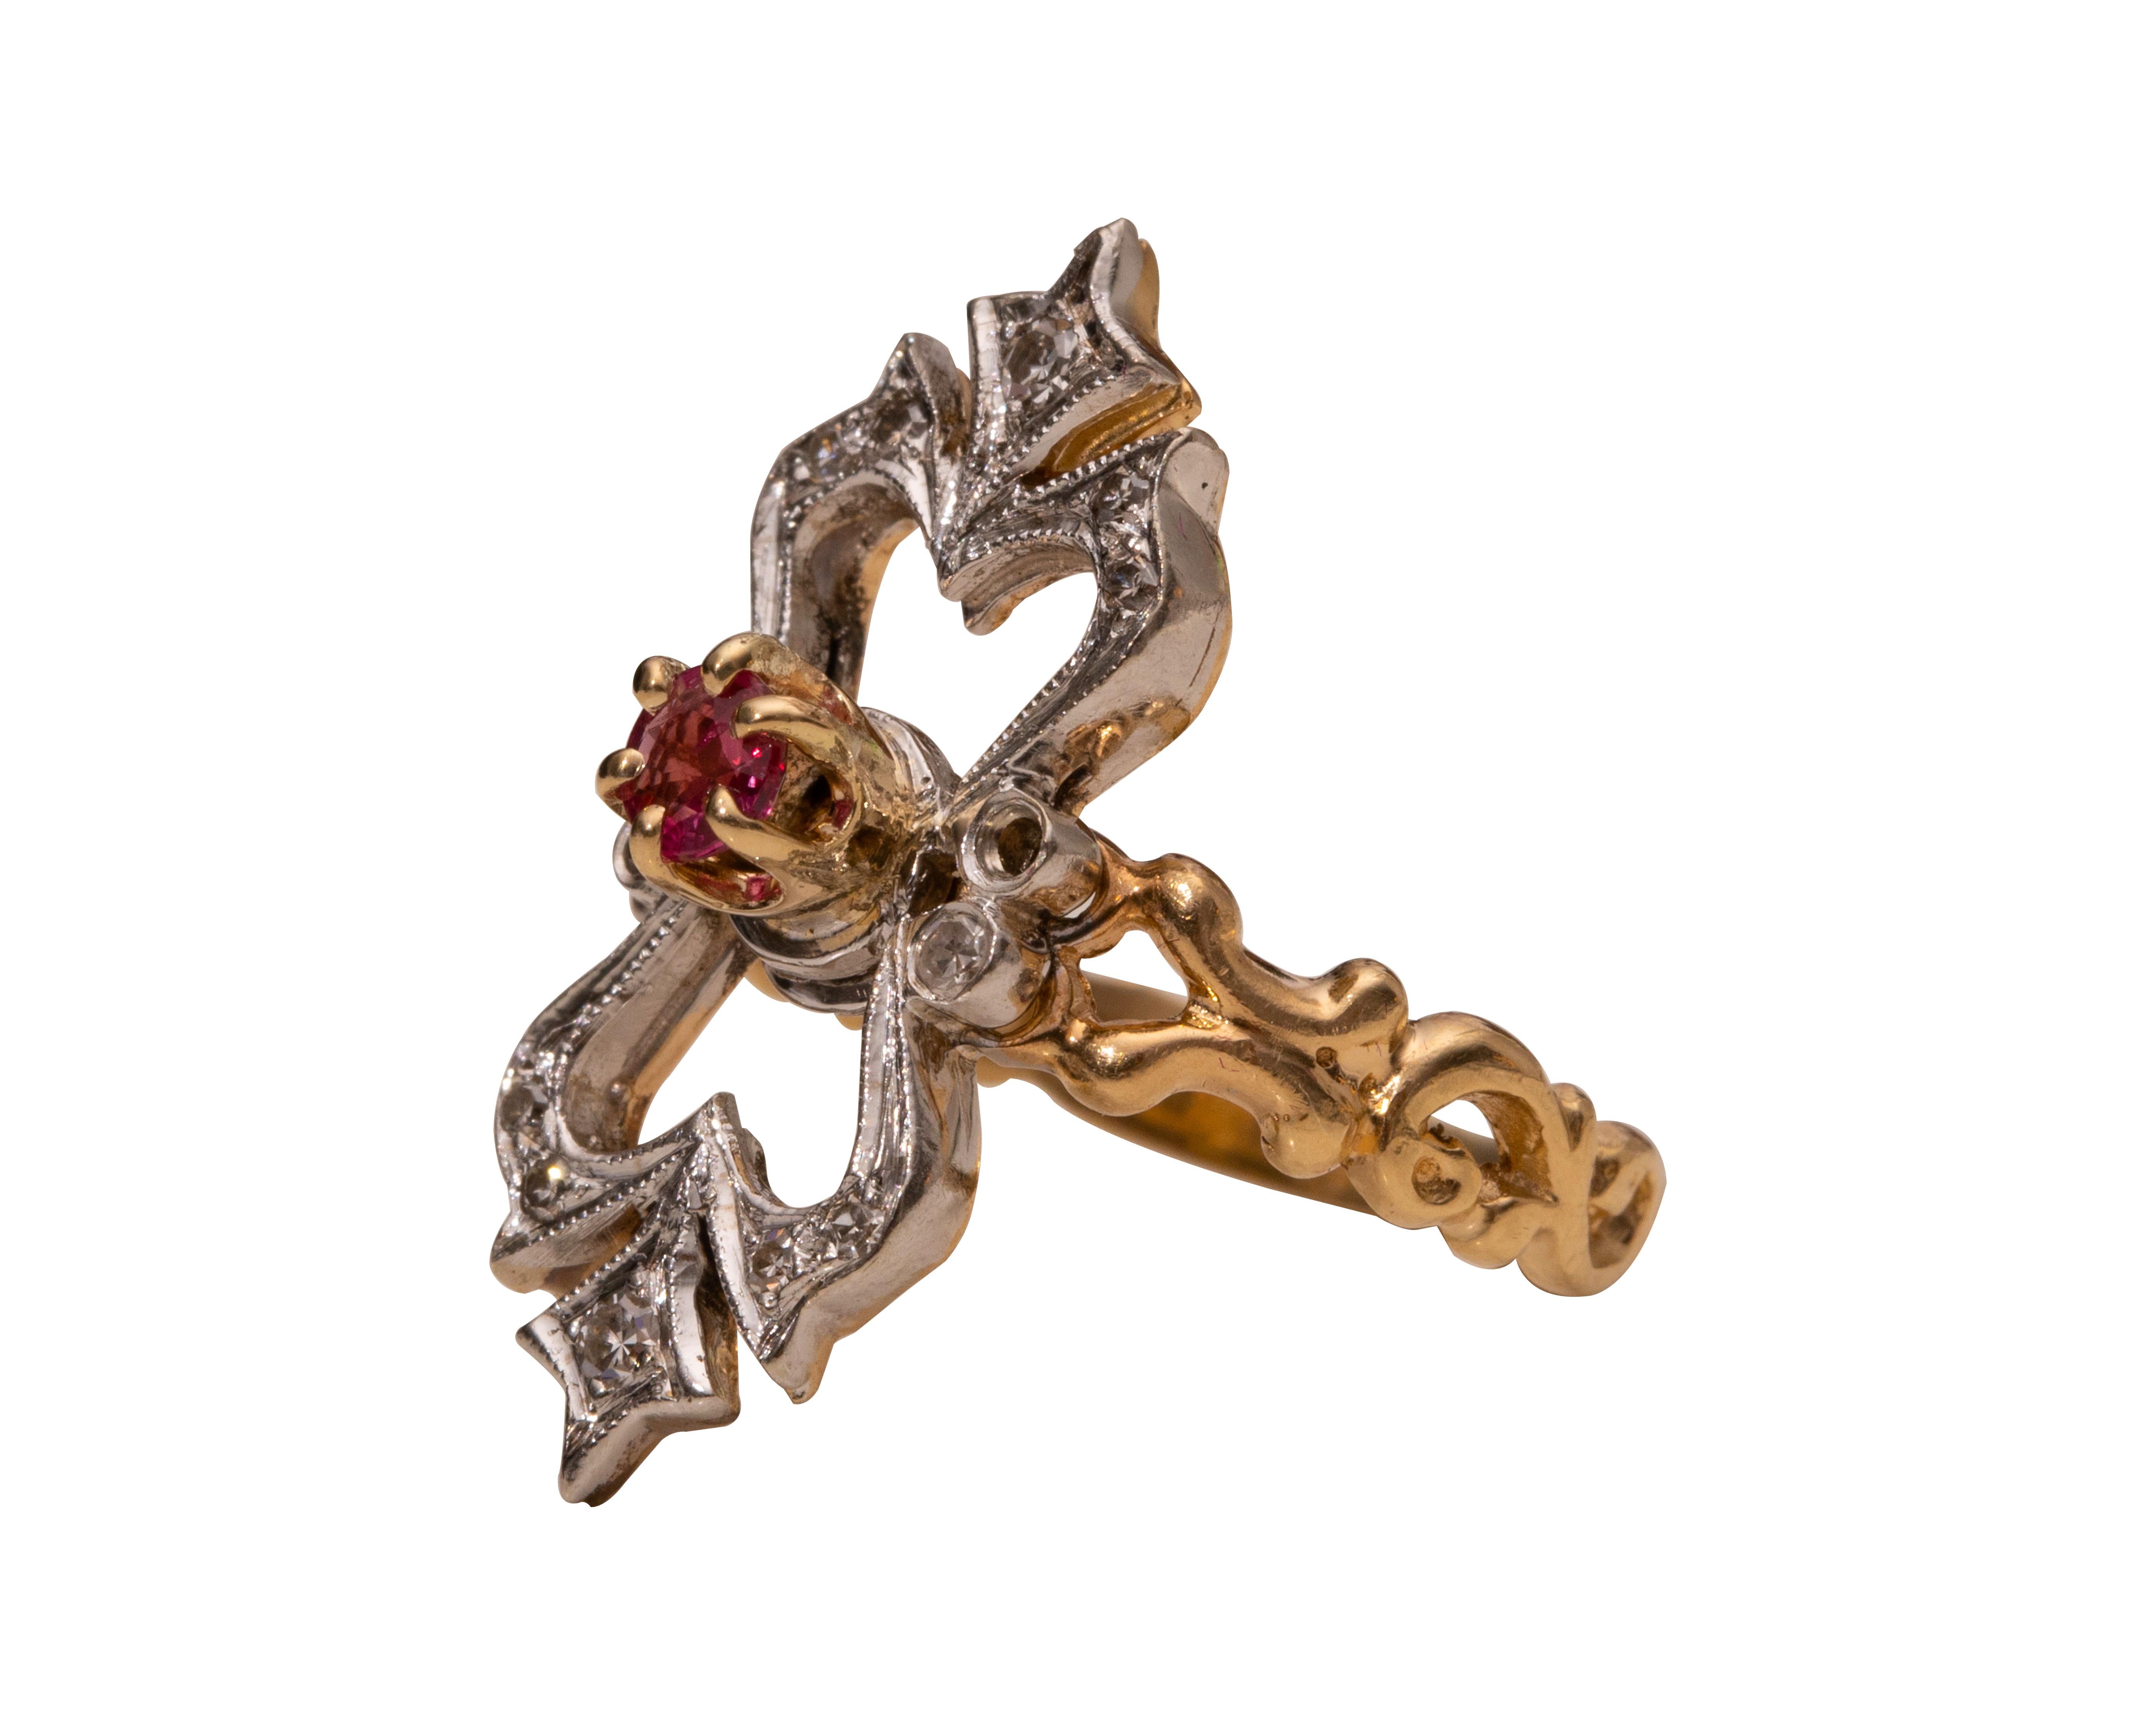 Here we have an excellent example of a 1920's era two-tone gold ring in a classic Art Nouveau style. This lovely openwork shield features a natural ruby at the center of a beautiful curvaceous white gold open design top. The top features antique